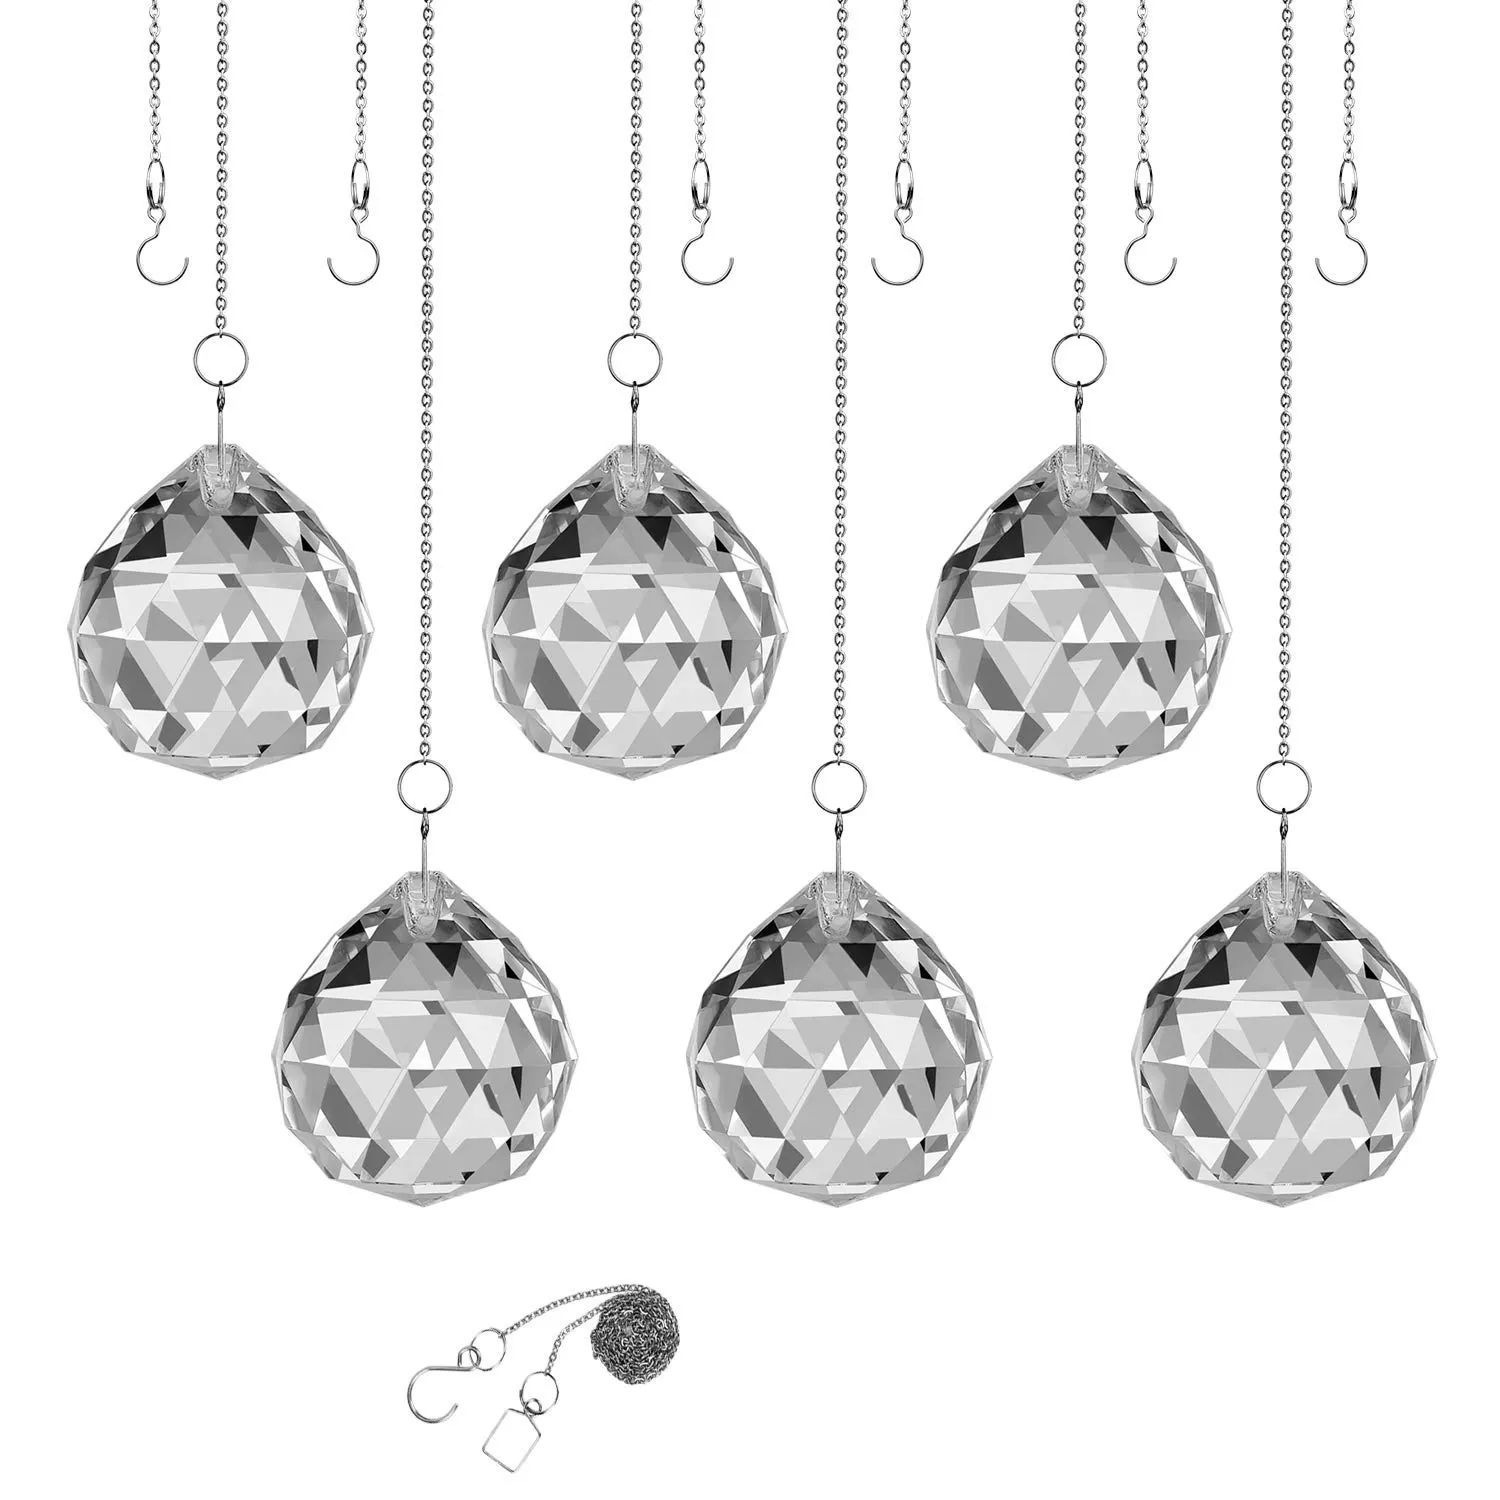 JY High Quality Hanging Crystals Prisms Sun Shine Catcher Rainbow Pendants Clear Crystal Ball